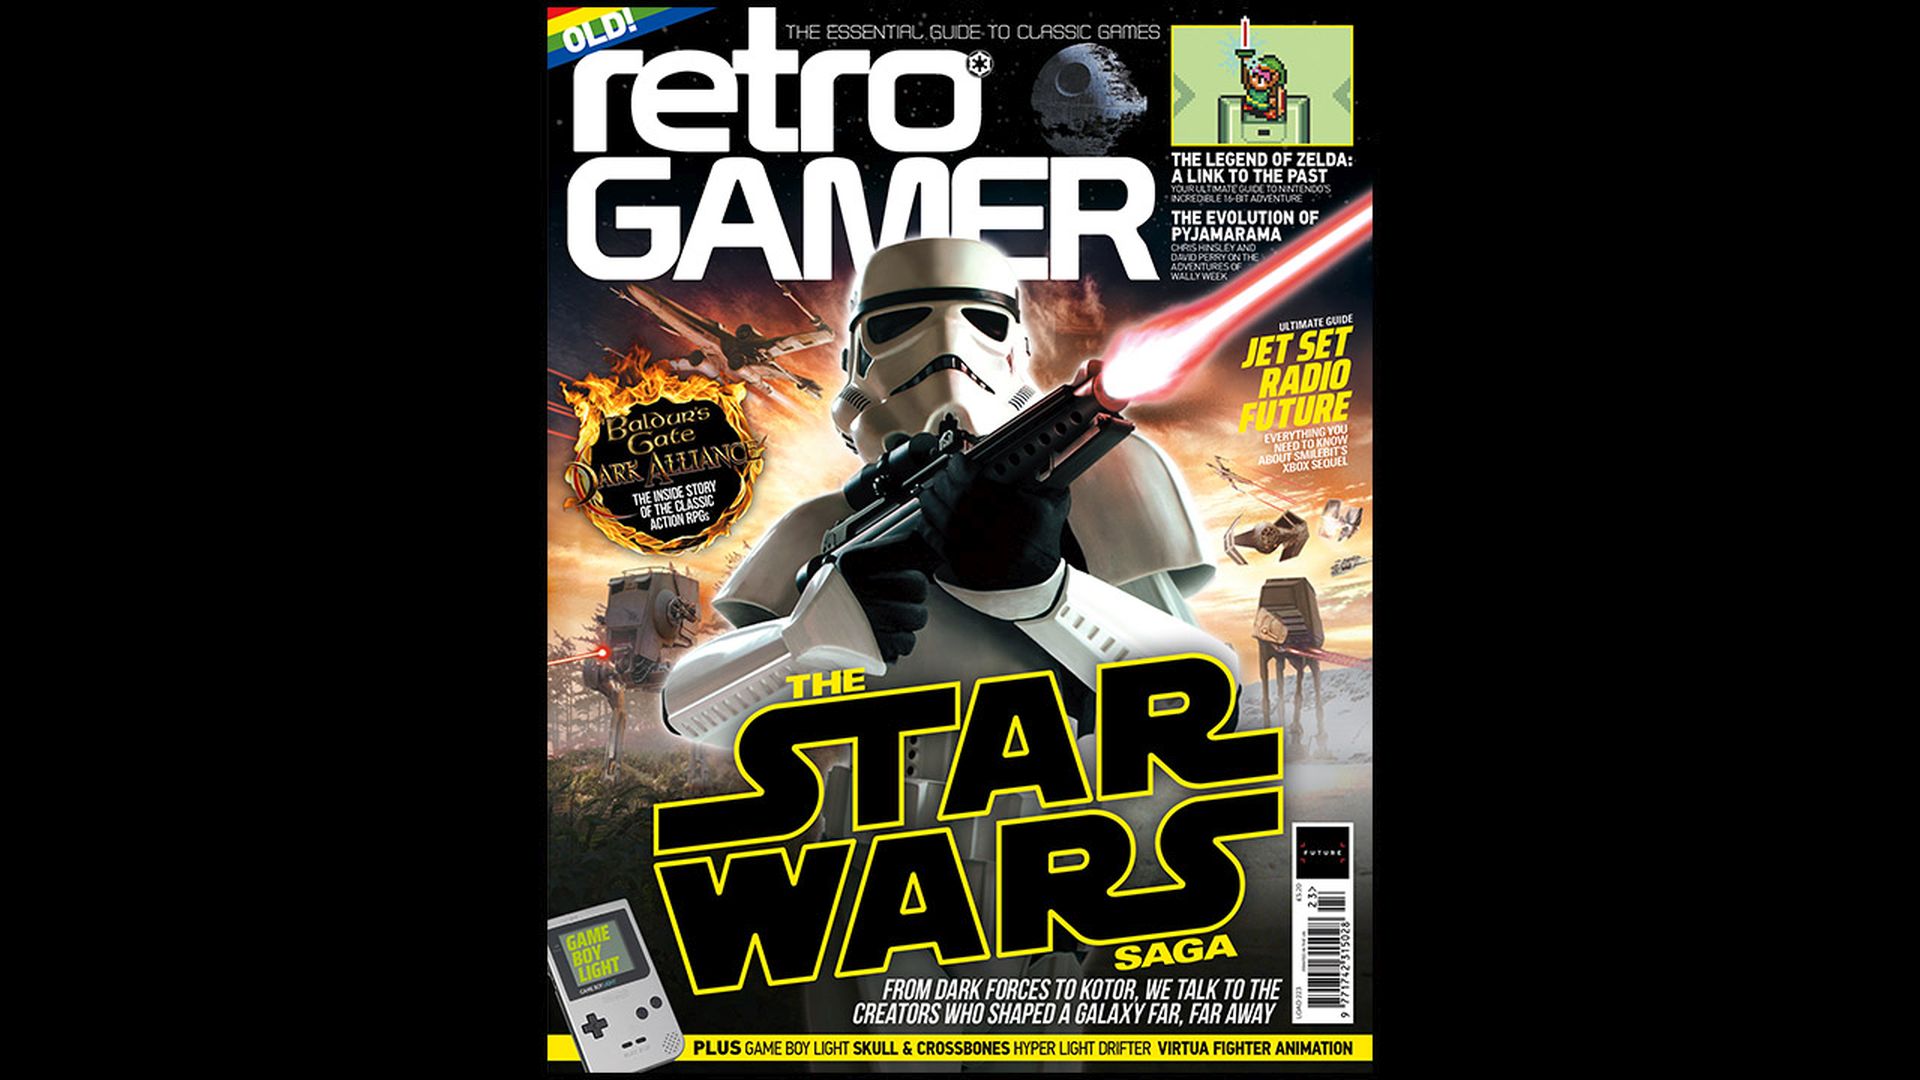 From Dark Forces to Battlefront, Retro Gamer charts the history of Star Wars video games